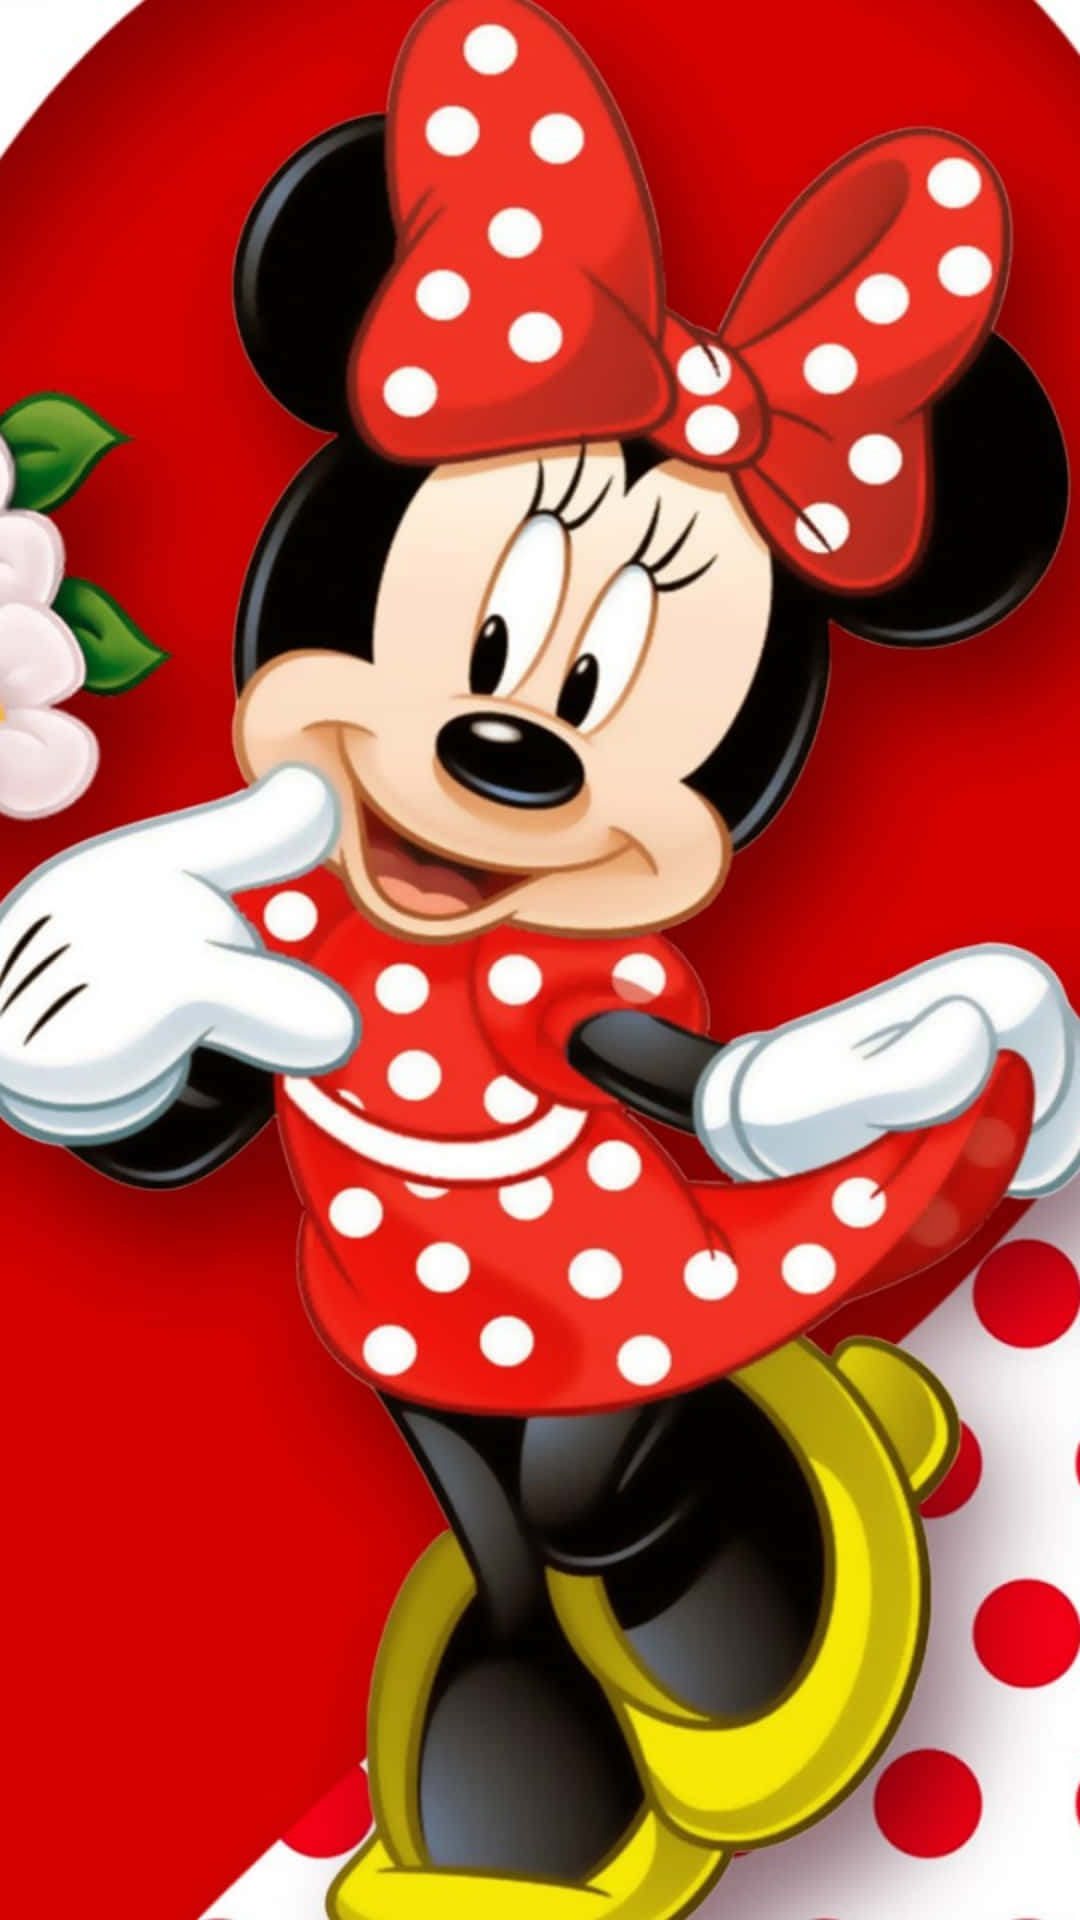 Adorable Minnie Mouse Chic Wallpaper